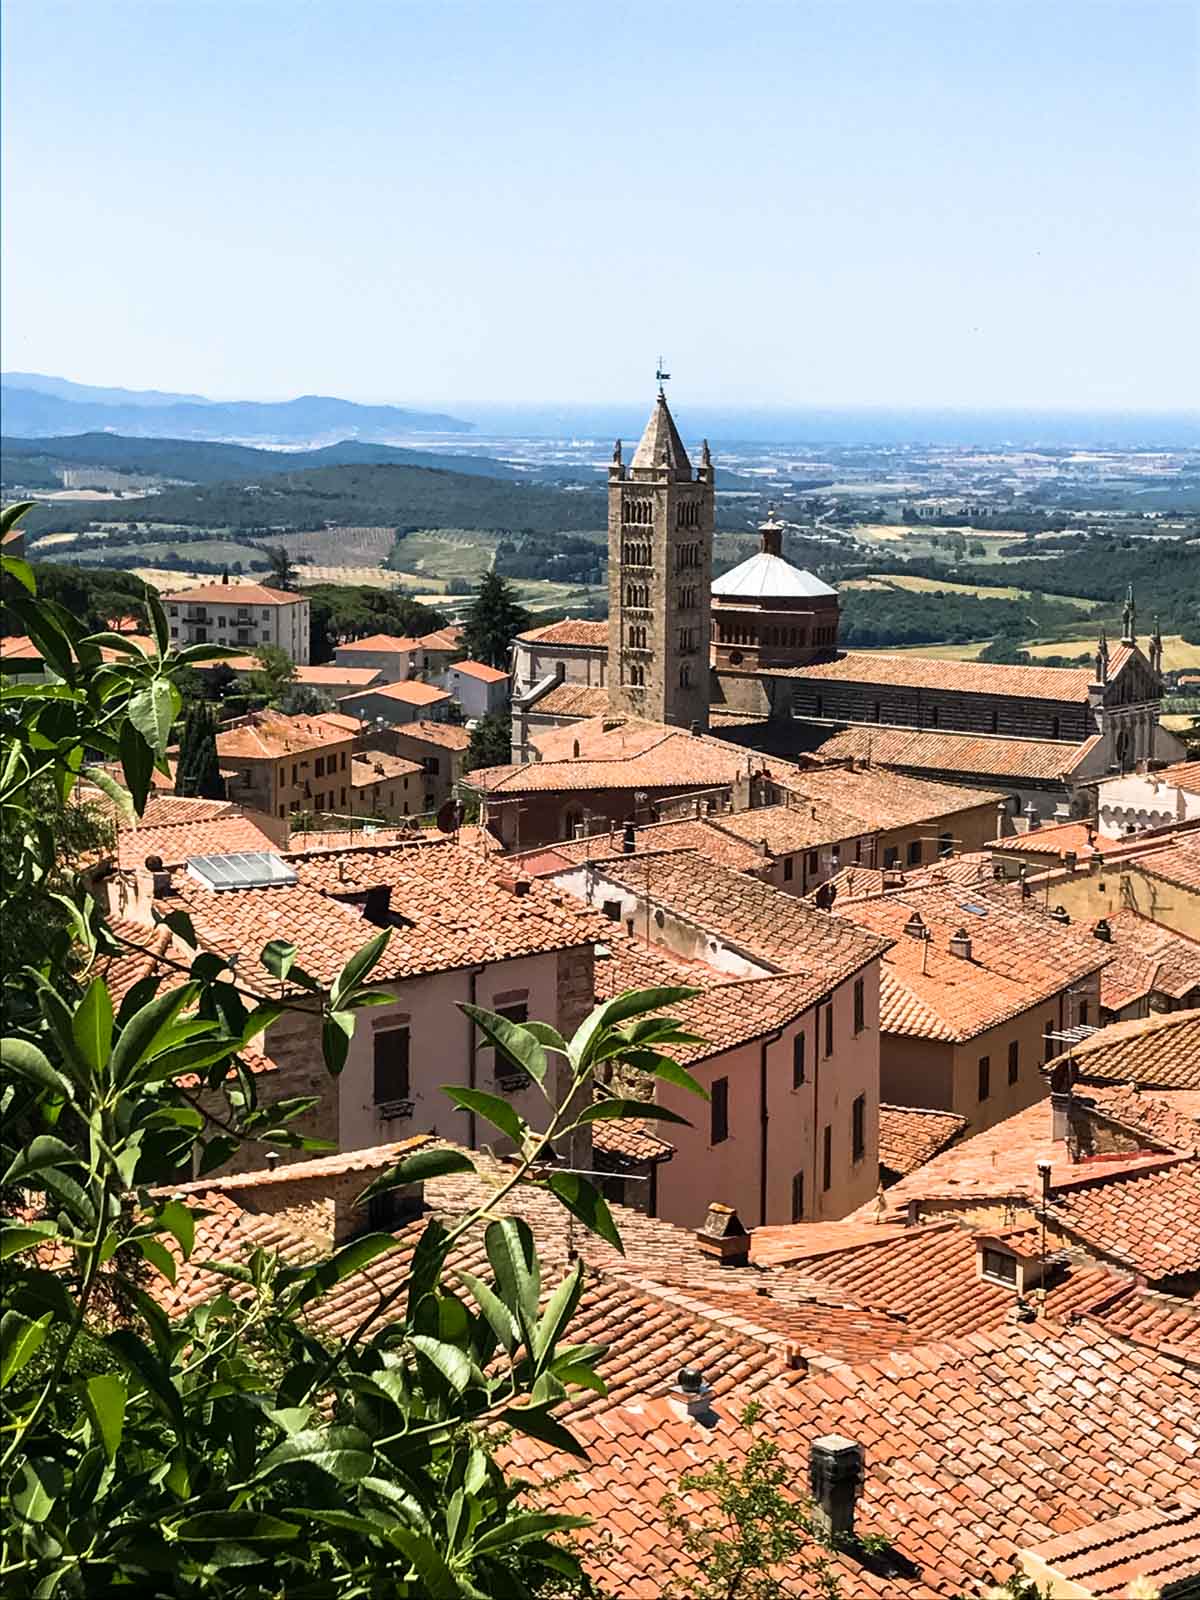 A photo journal from two of my favorite day trips from Florence, Italy - the quaint and adorable villages of Pienza, Montalcino, and Masa Maritima.